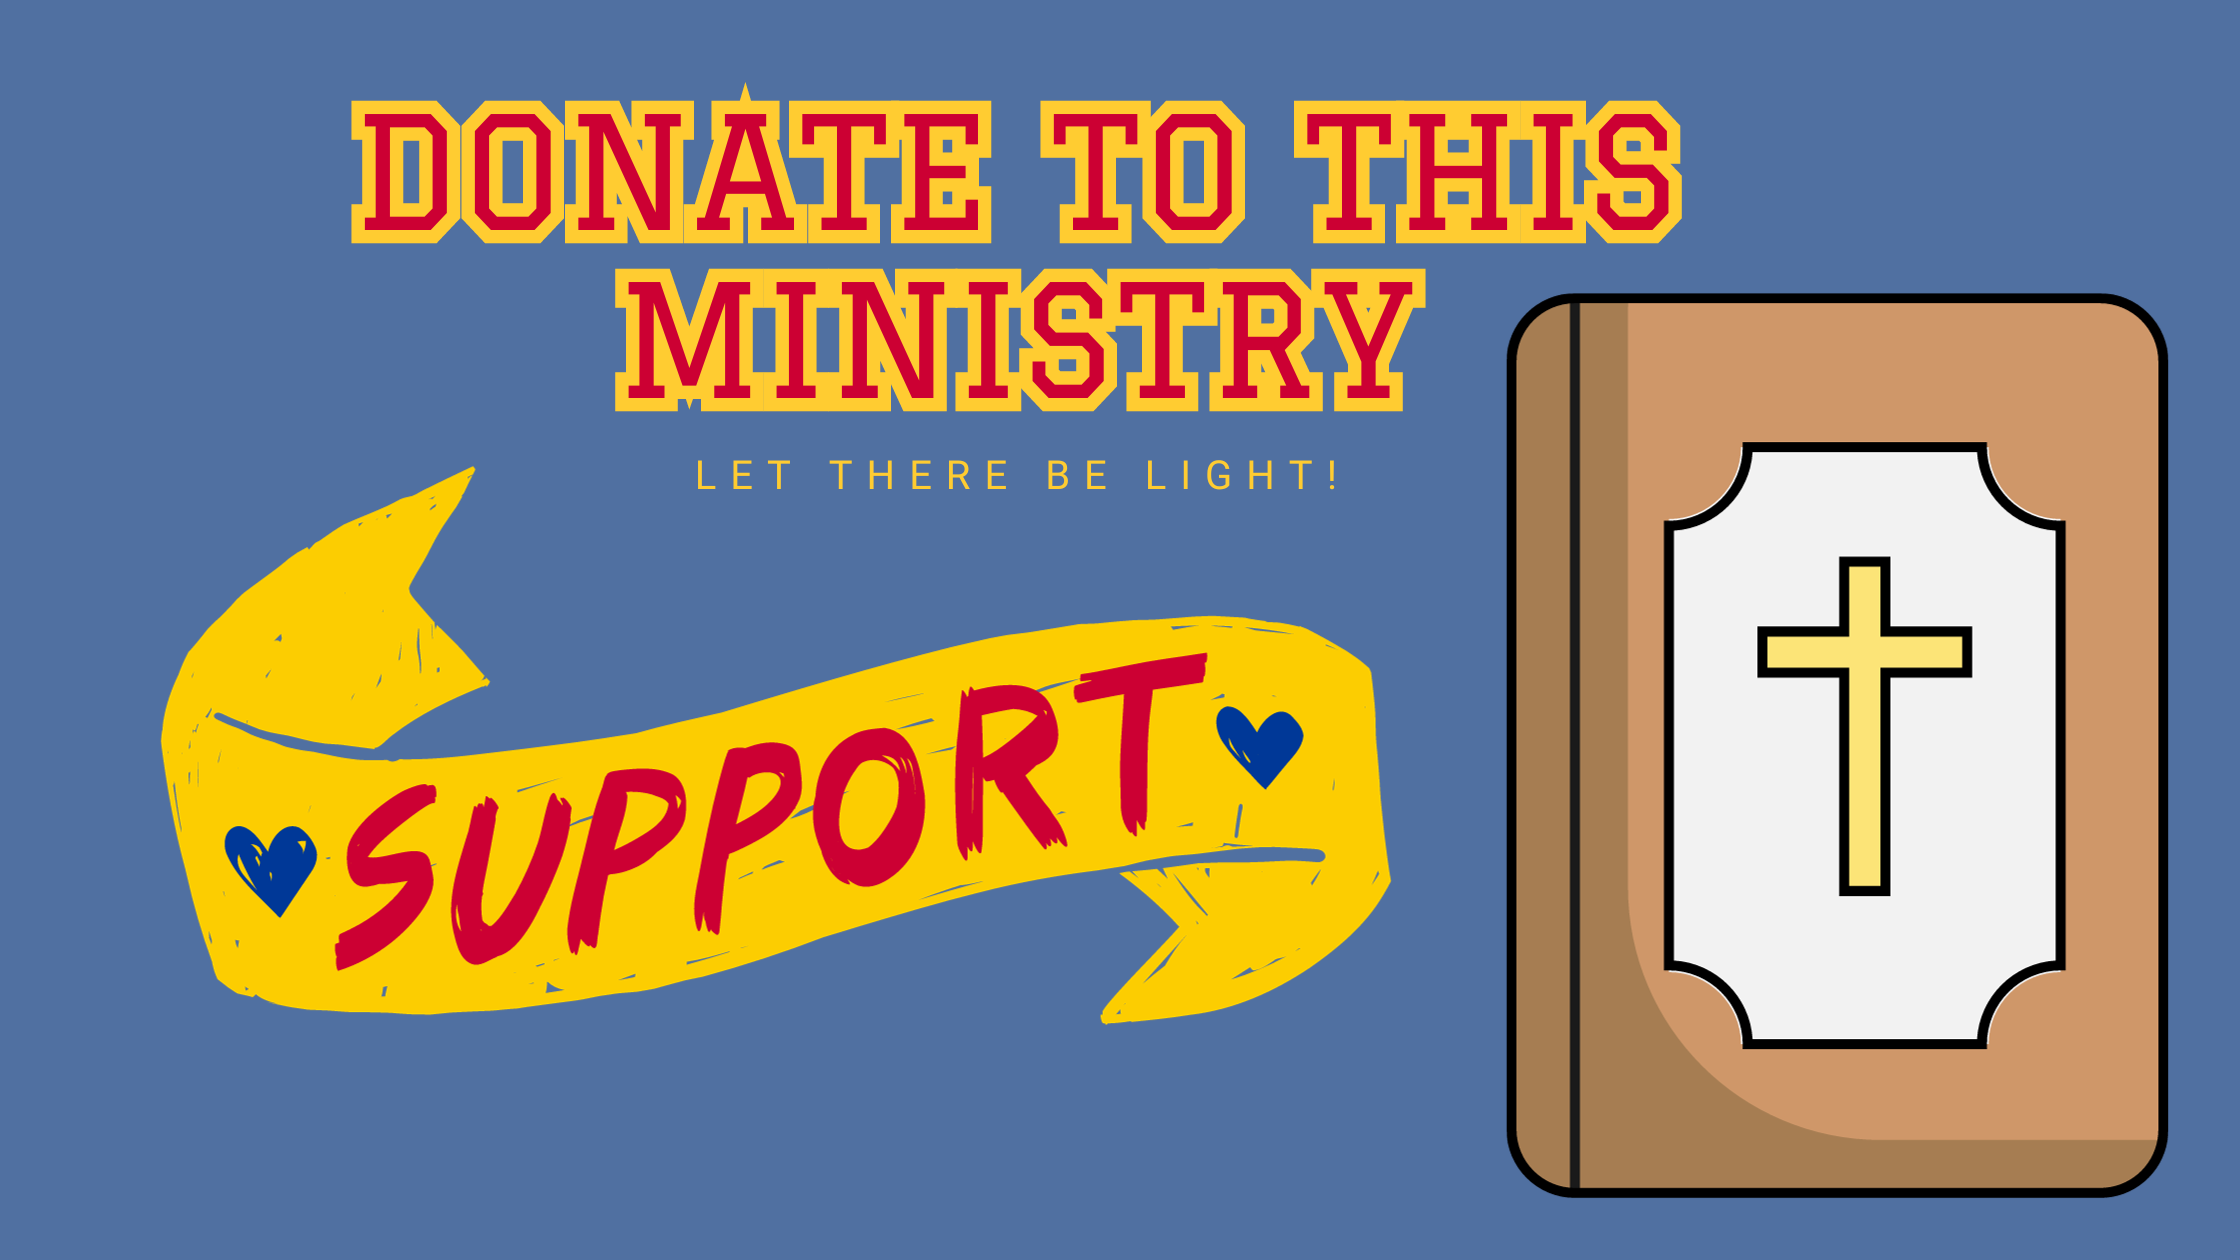 Donate to this ministry